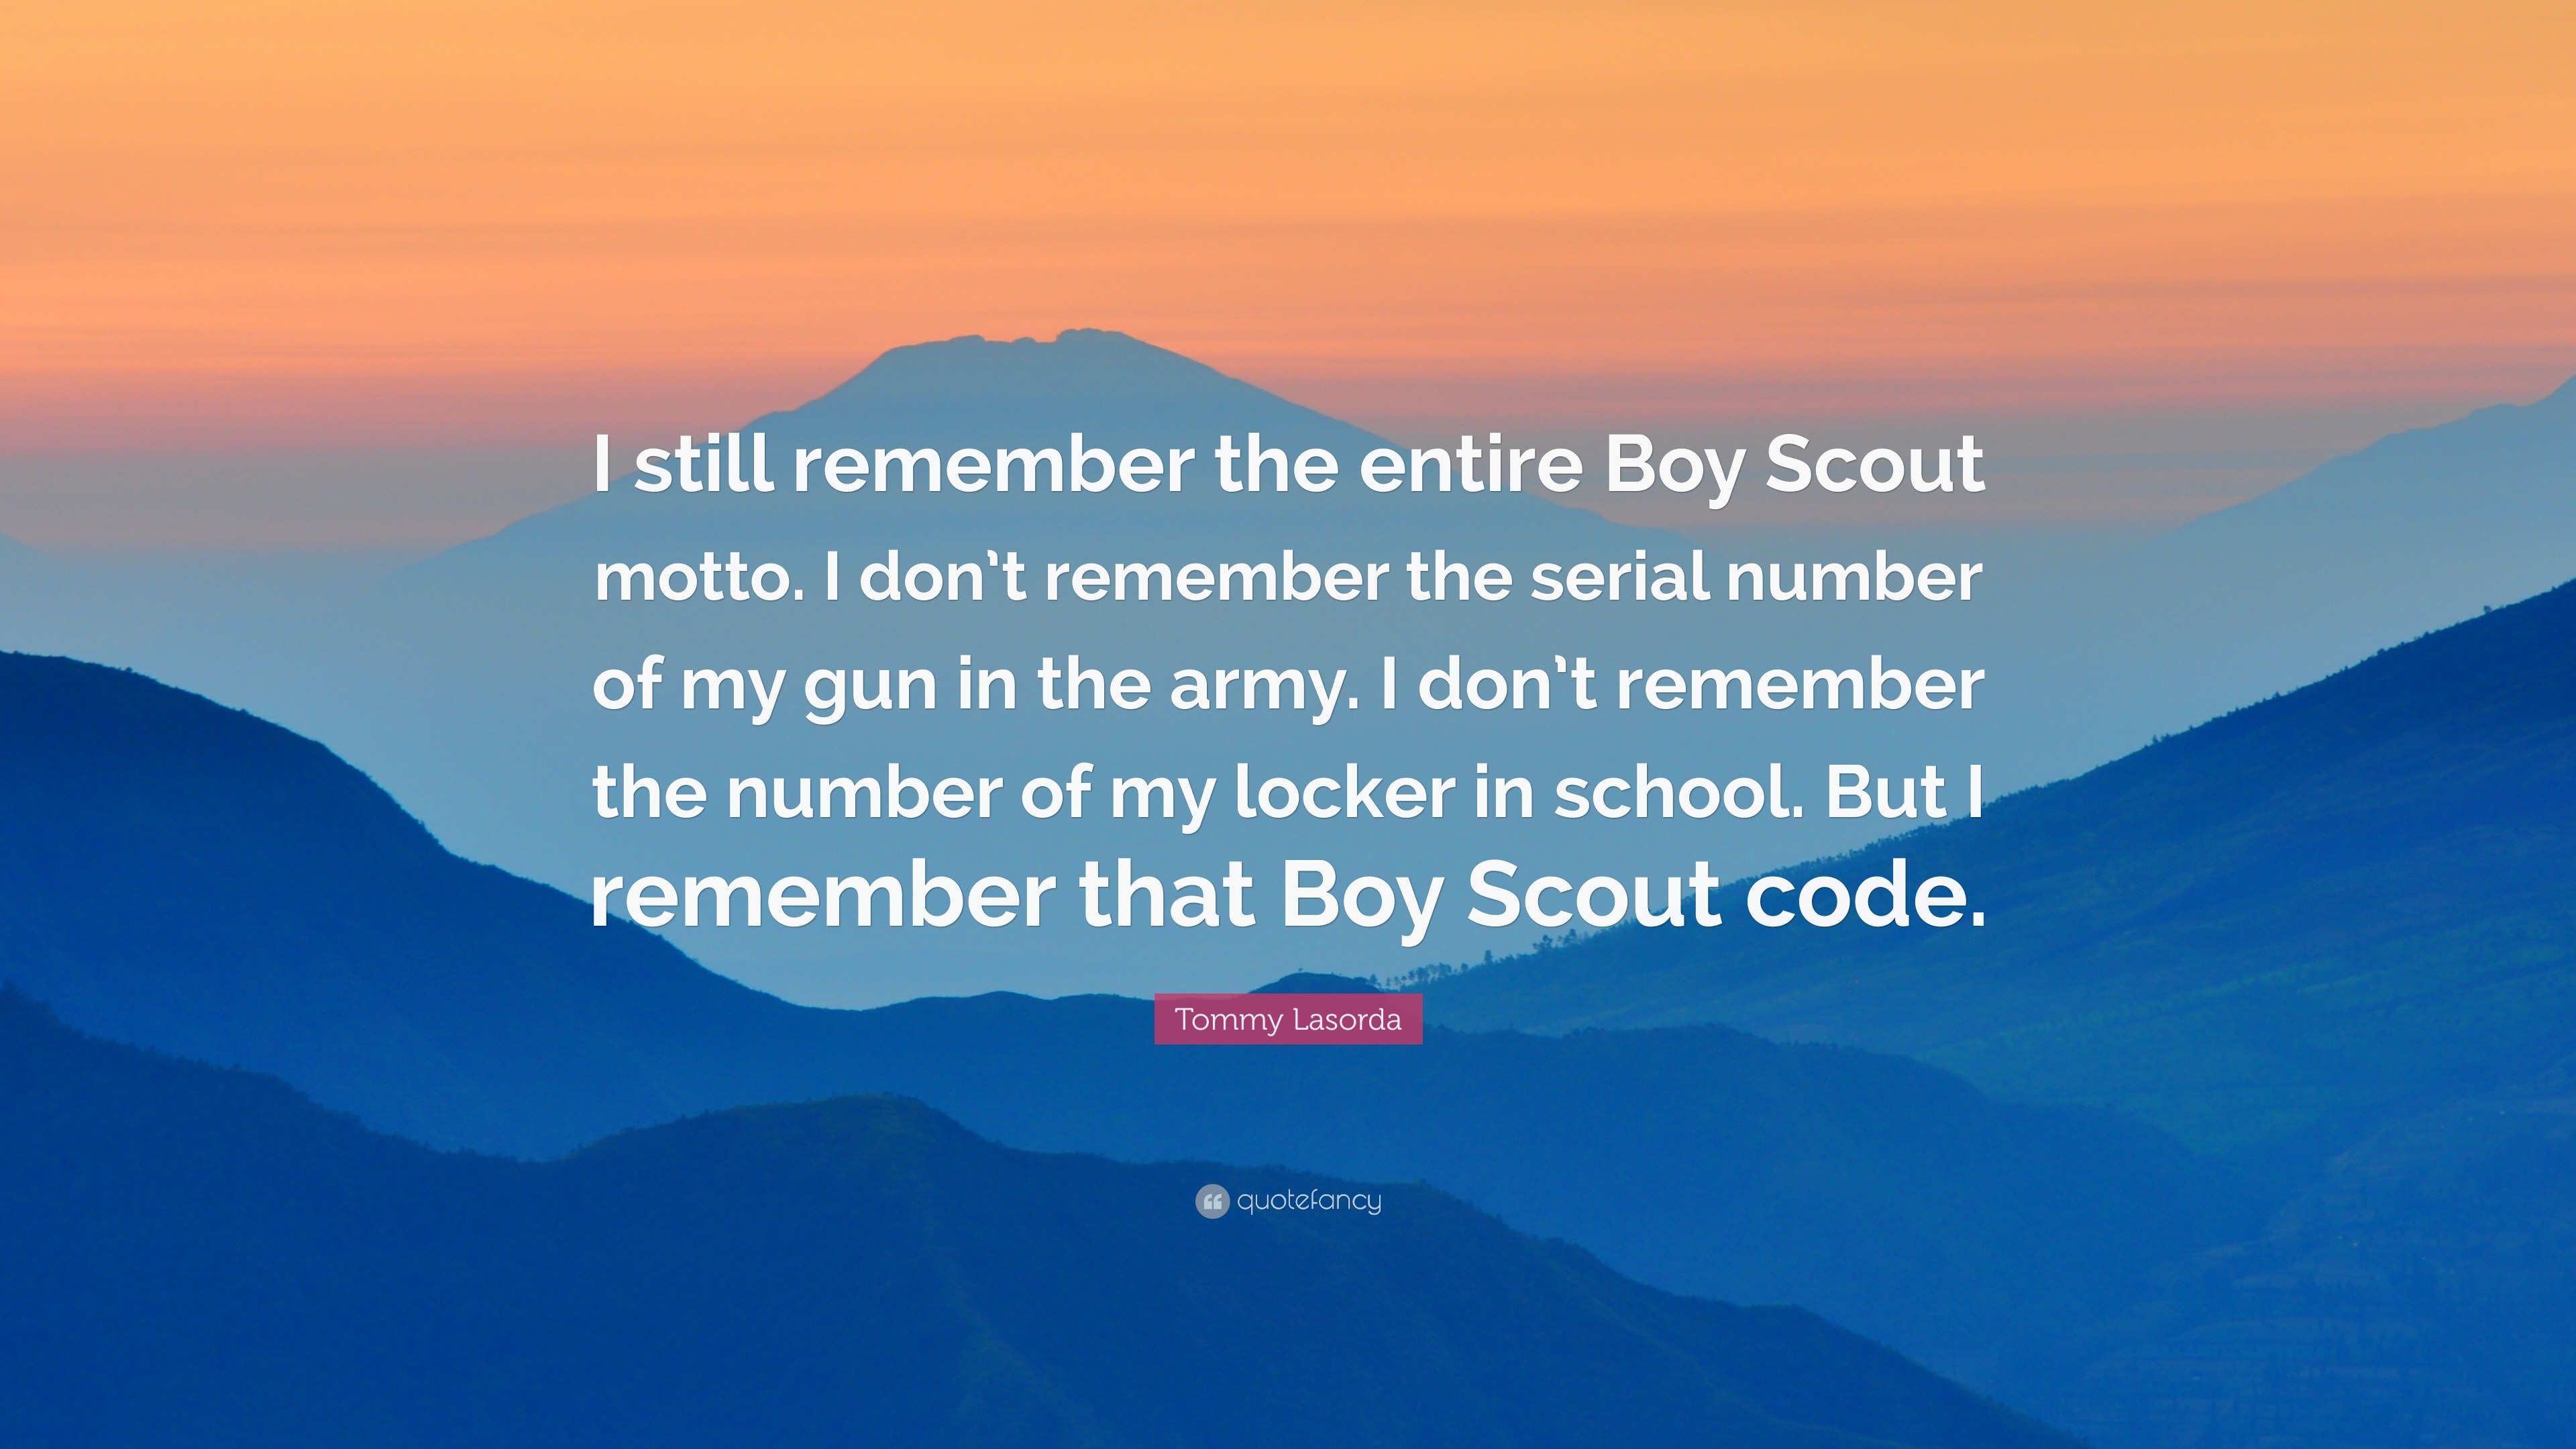 Tommy Lasorda Quote: “I still remember the entire Boy Scout motto